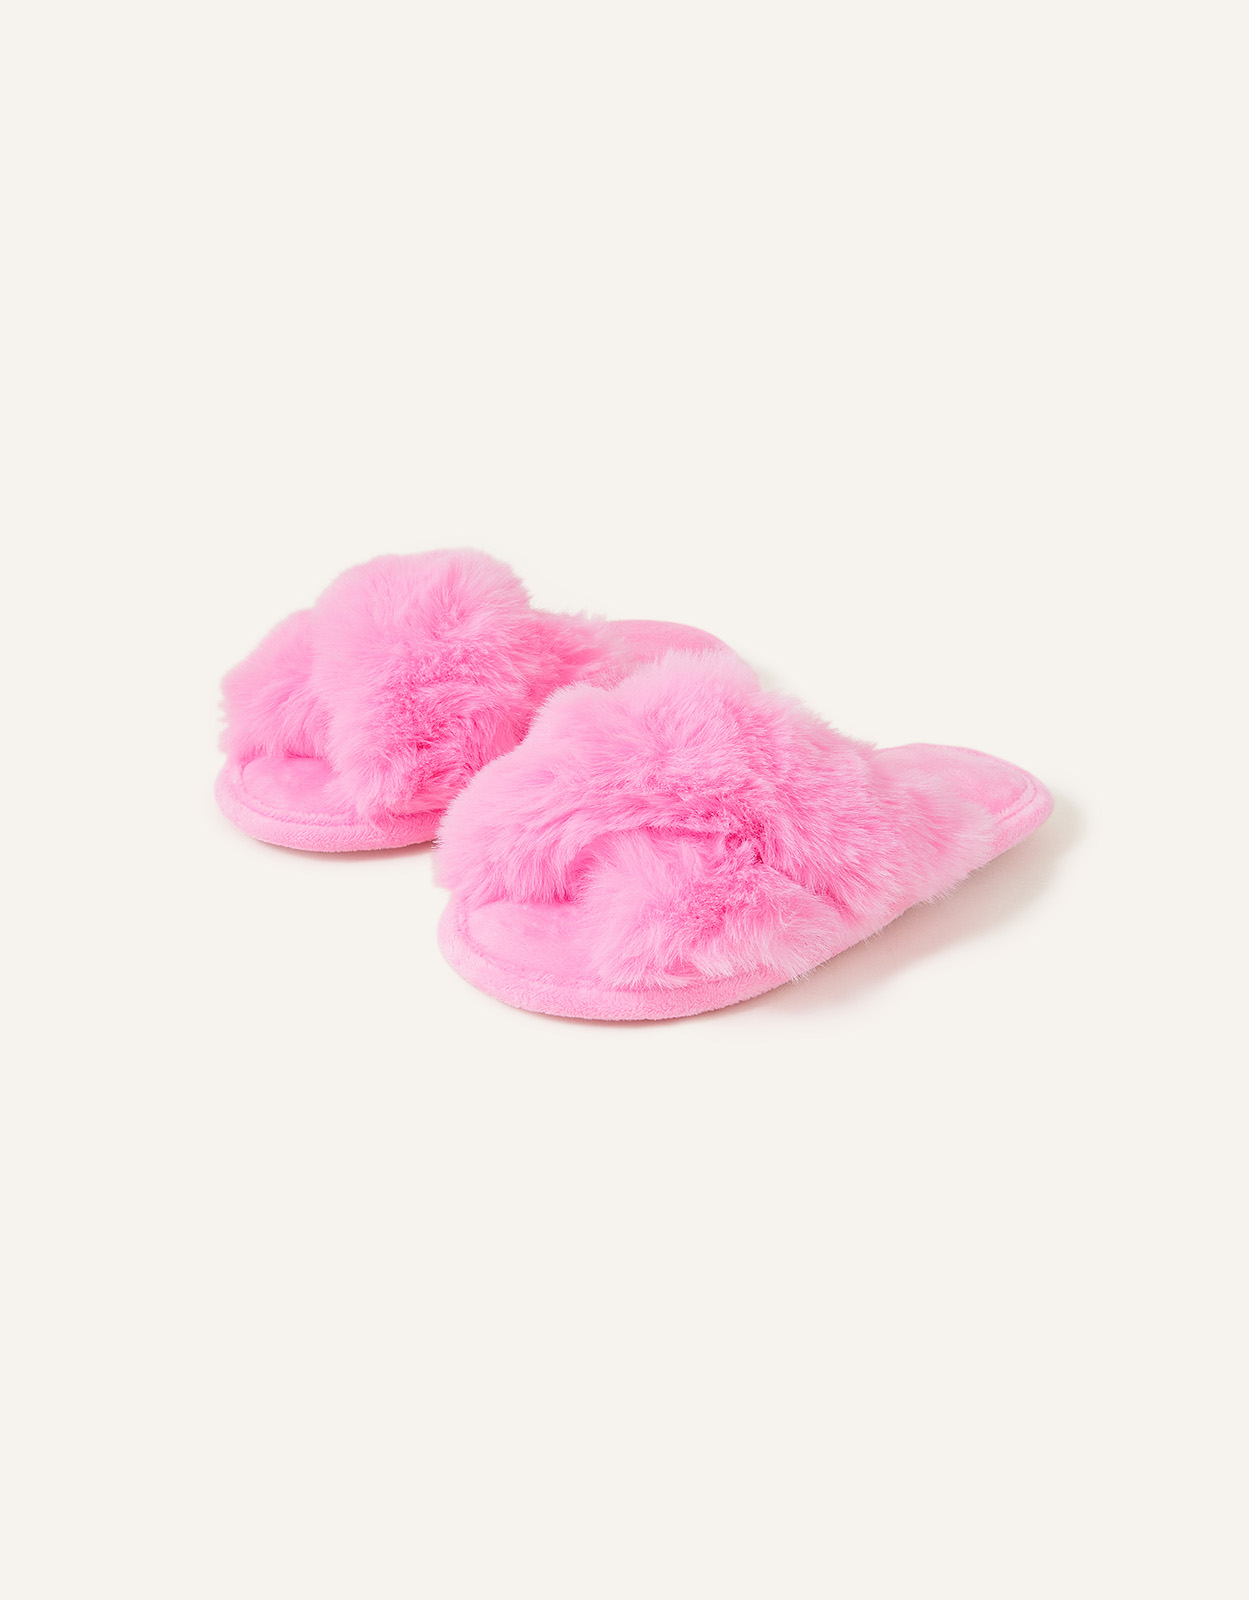 Accessorize Girl's Girls Faux Fur Sliders Pink, Size: 2-3